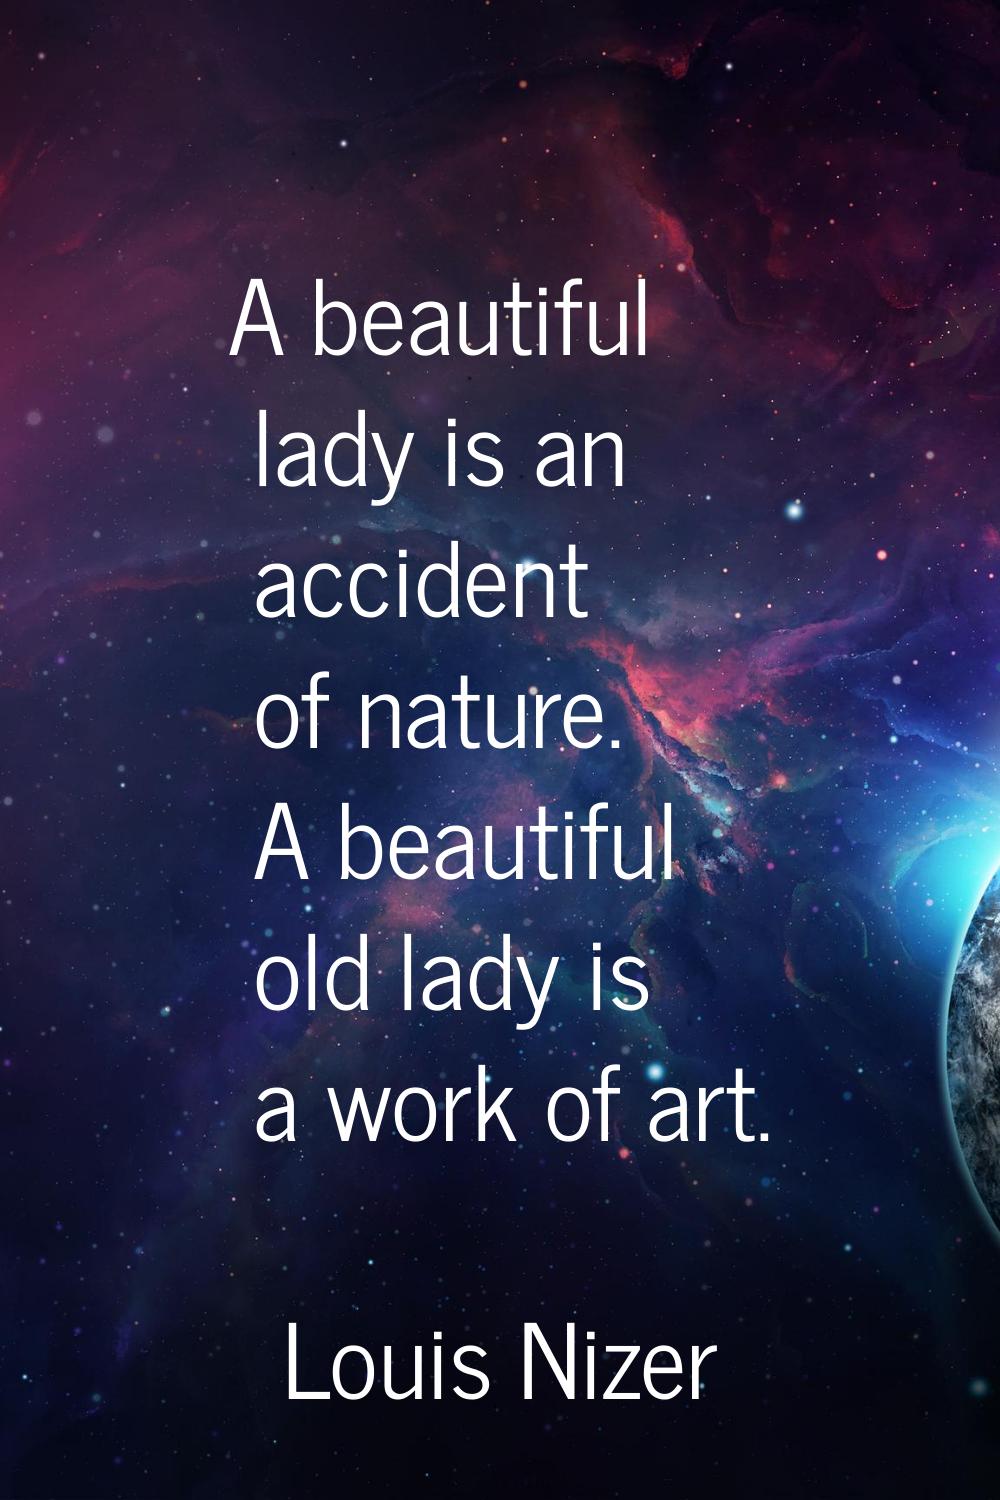 A beautiful lady is an accident of nature. A beautiful old lady is a work of art.